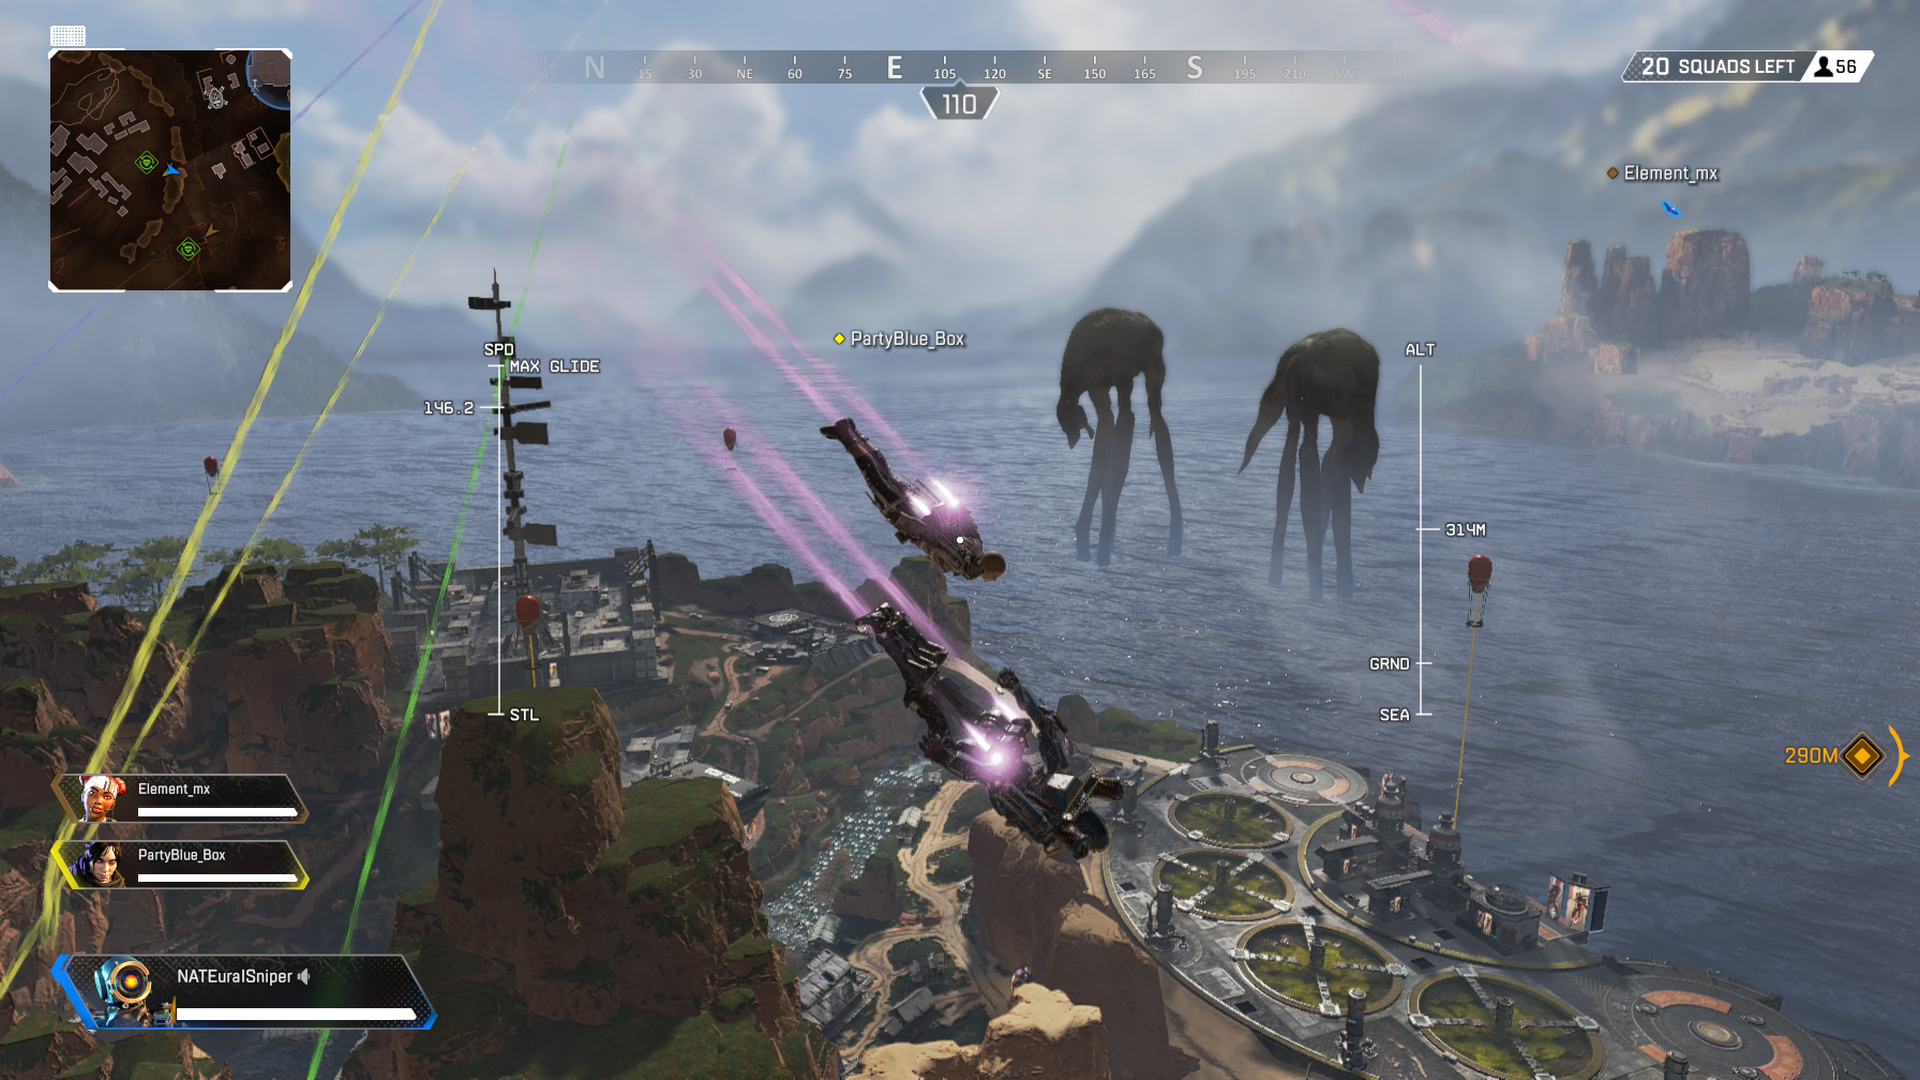 Review] Apex Legends Mobile: Free-to-play battle royale game mechanics